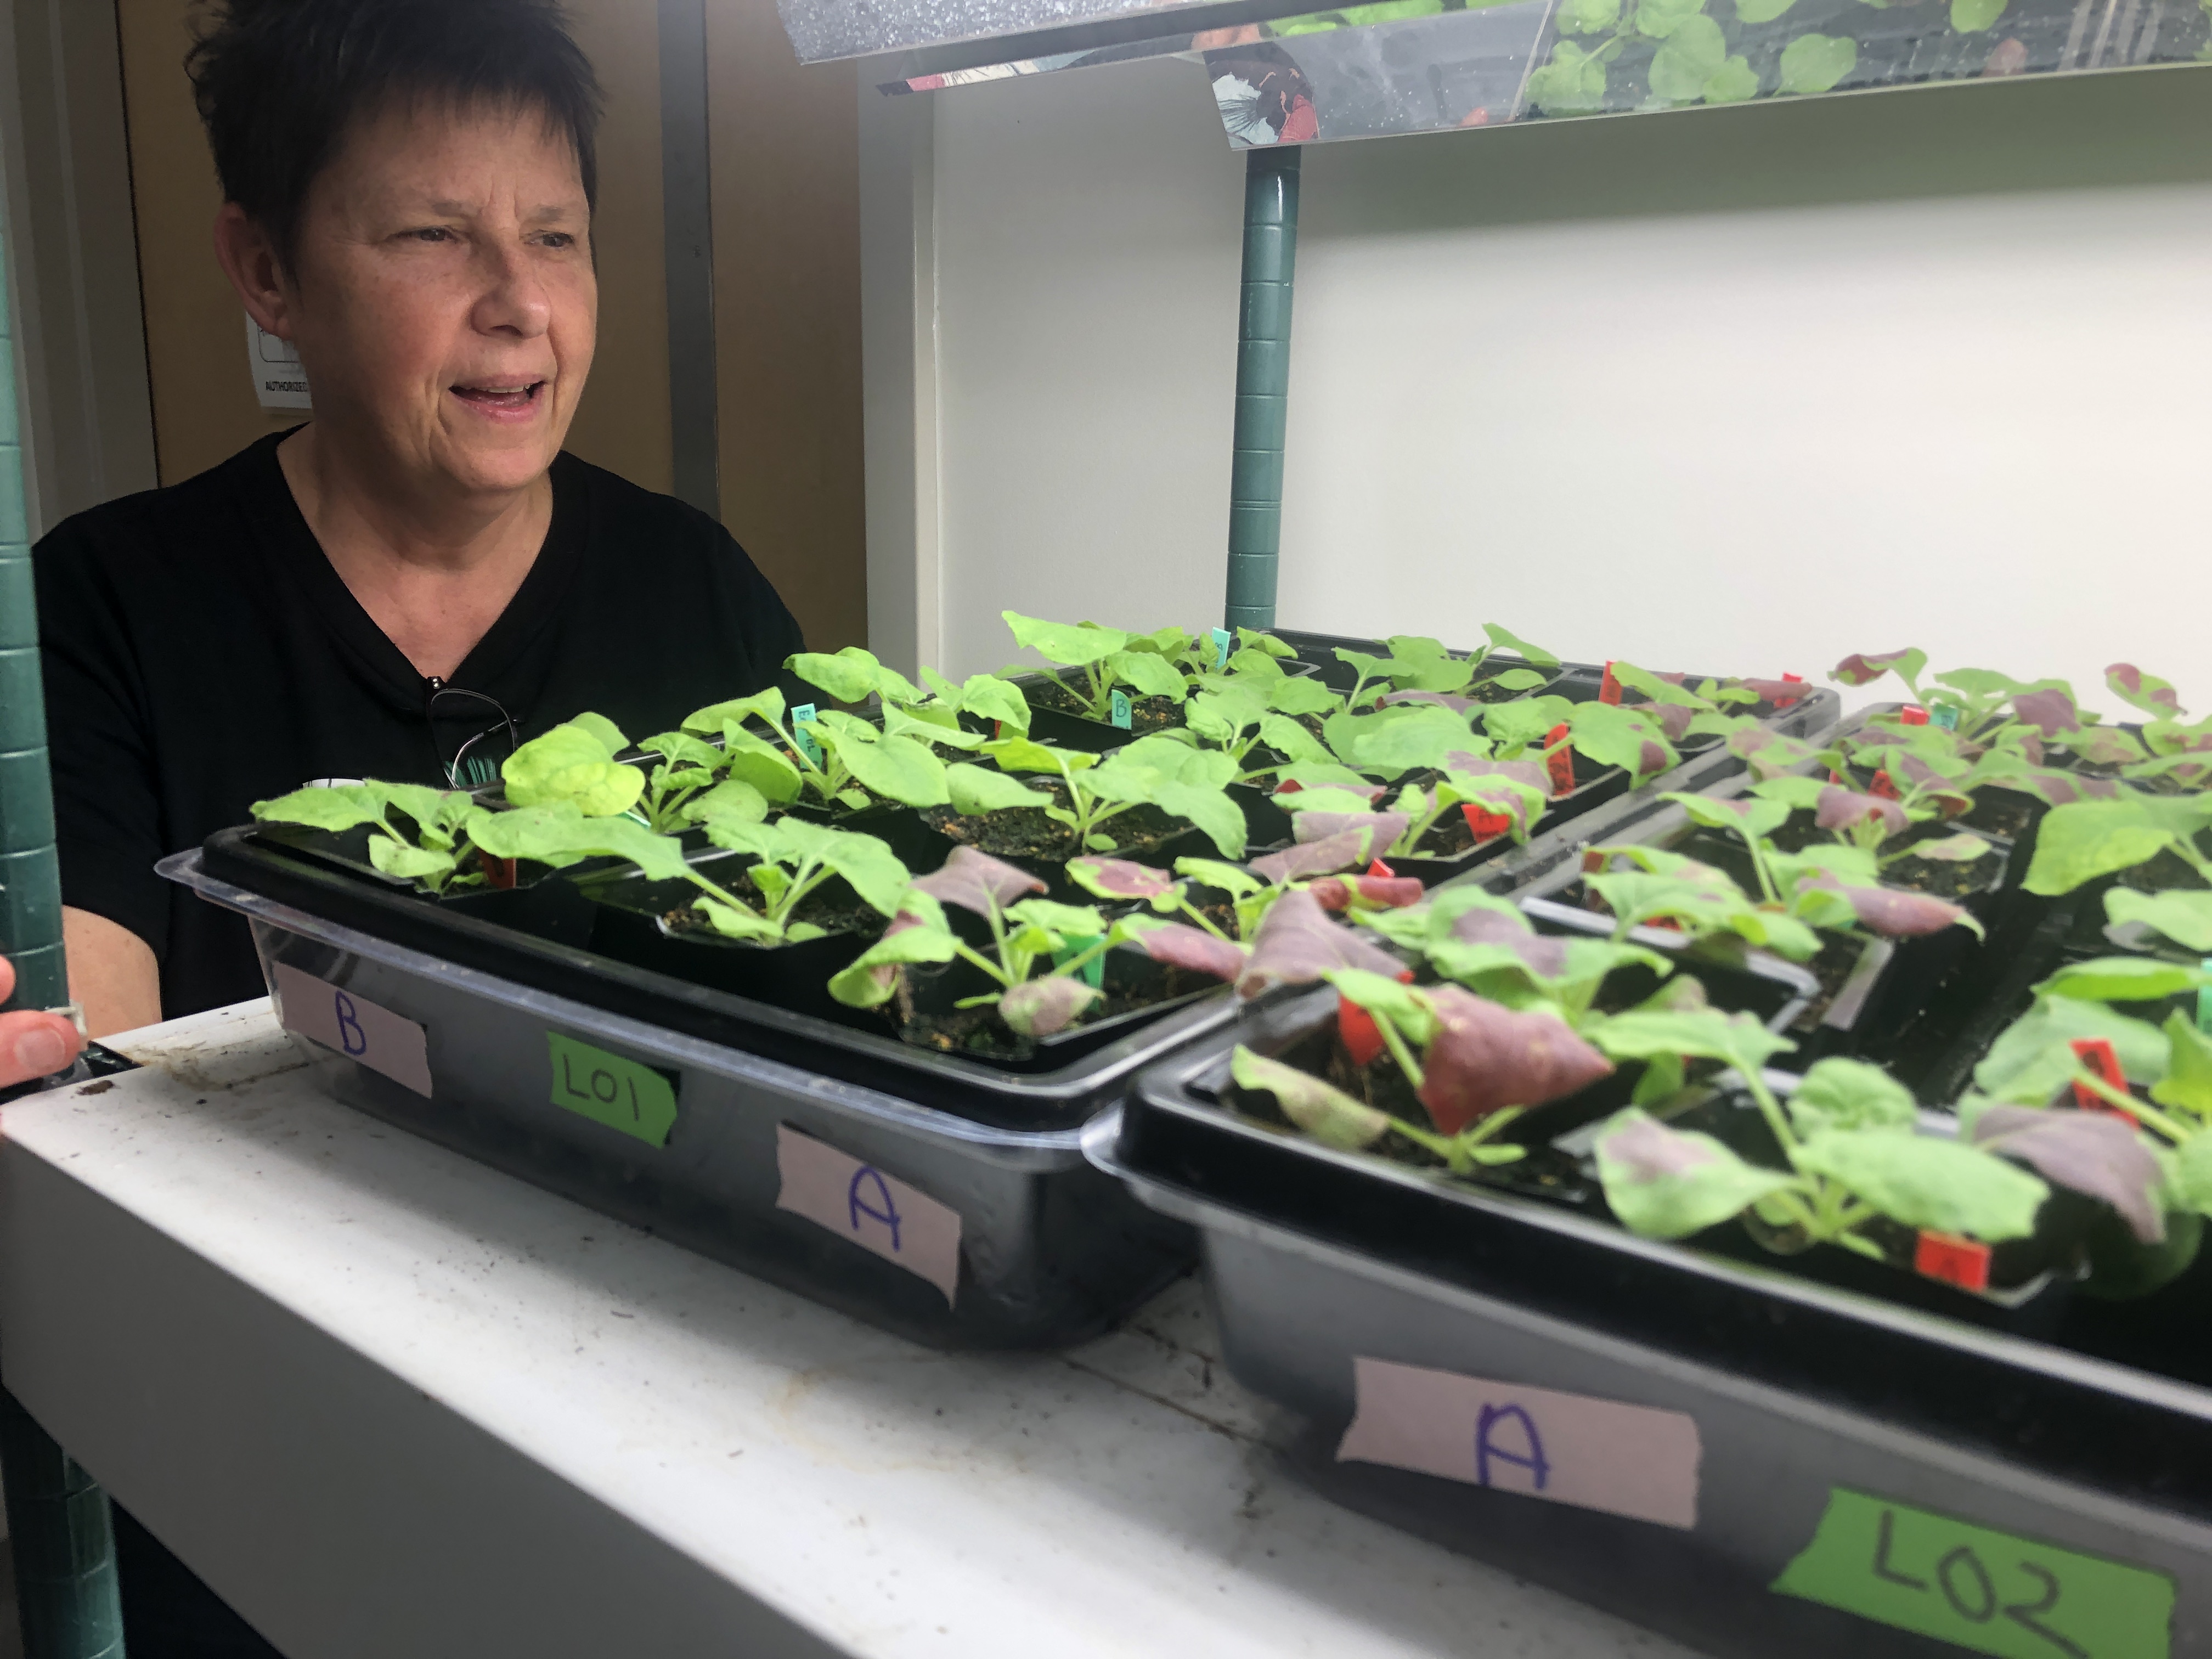 Professor Cameron looks at trays of seedlings under a bright light